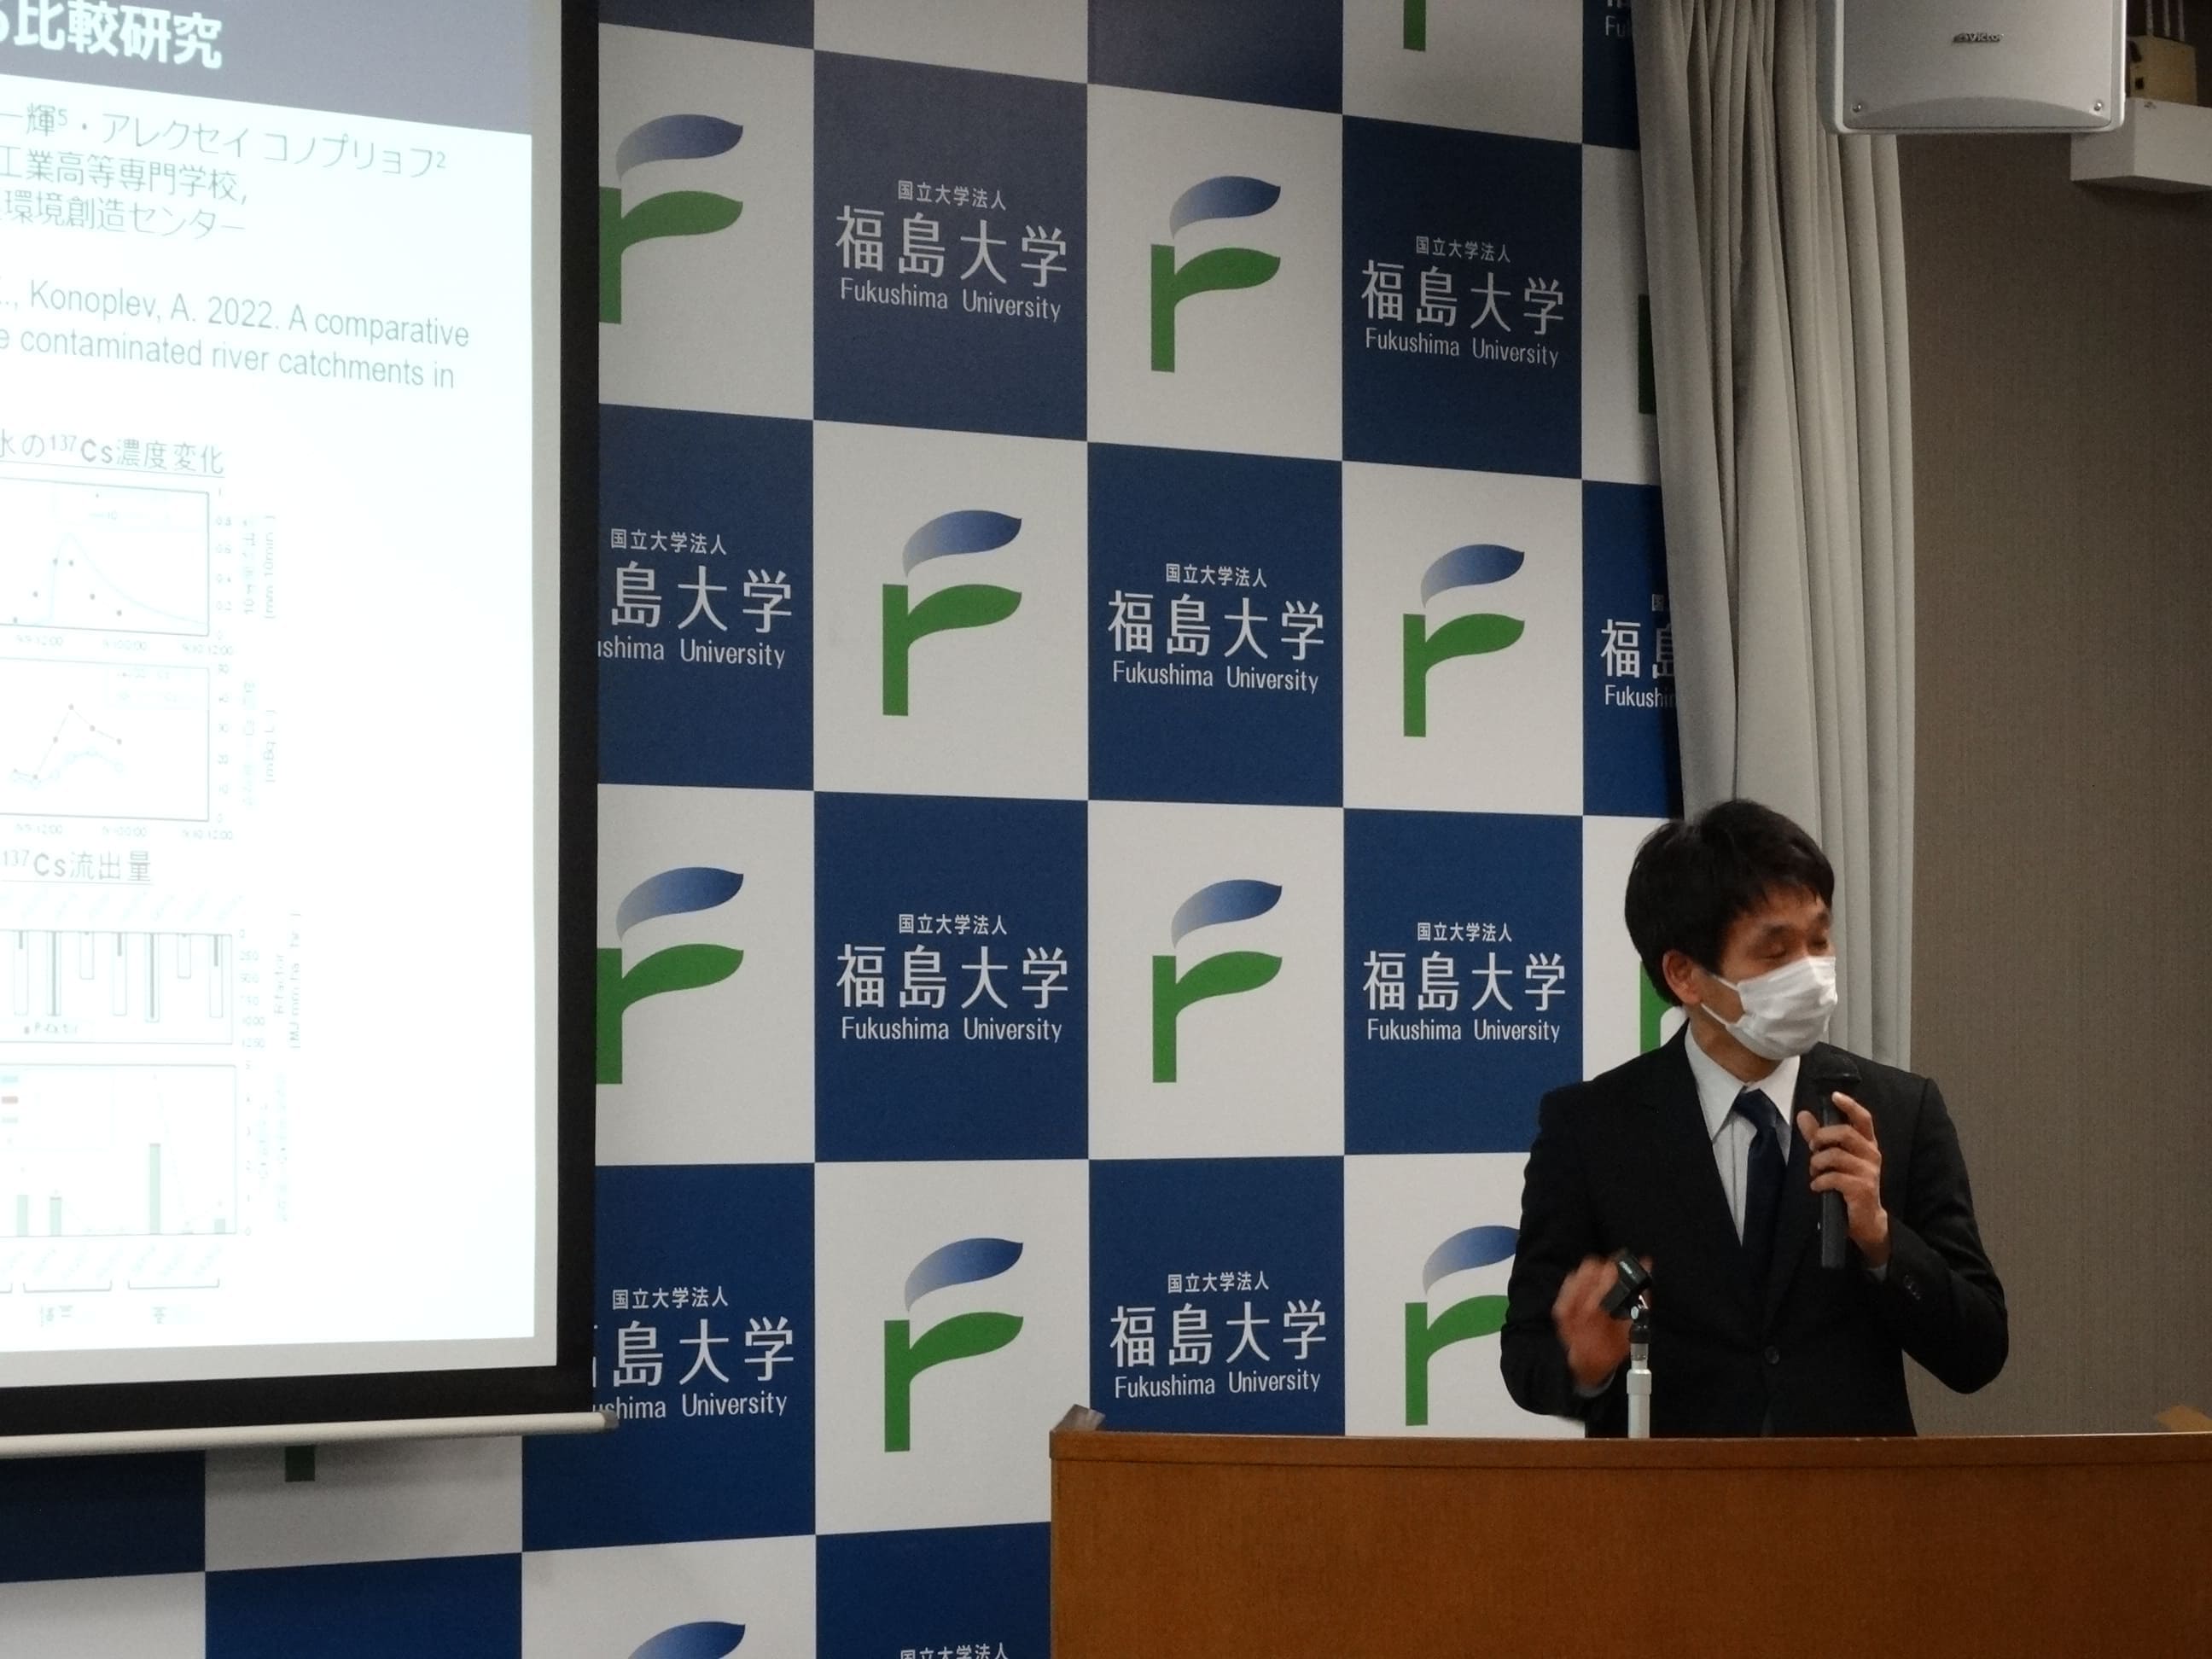 Prof. WAKIYAMA presenting the research result at the press conference